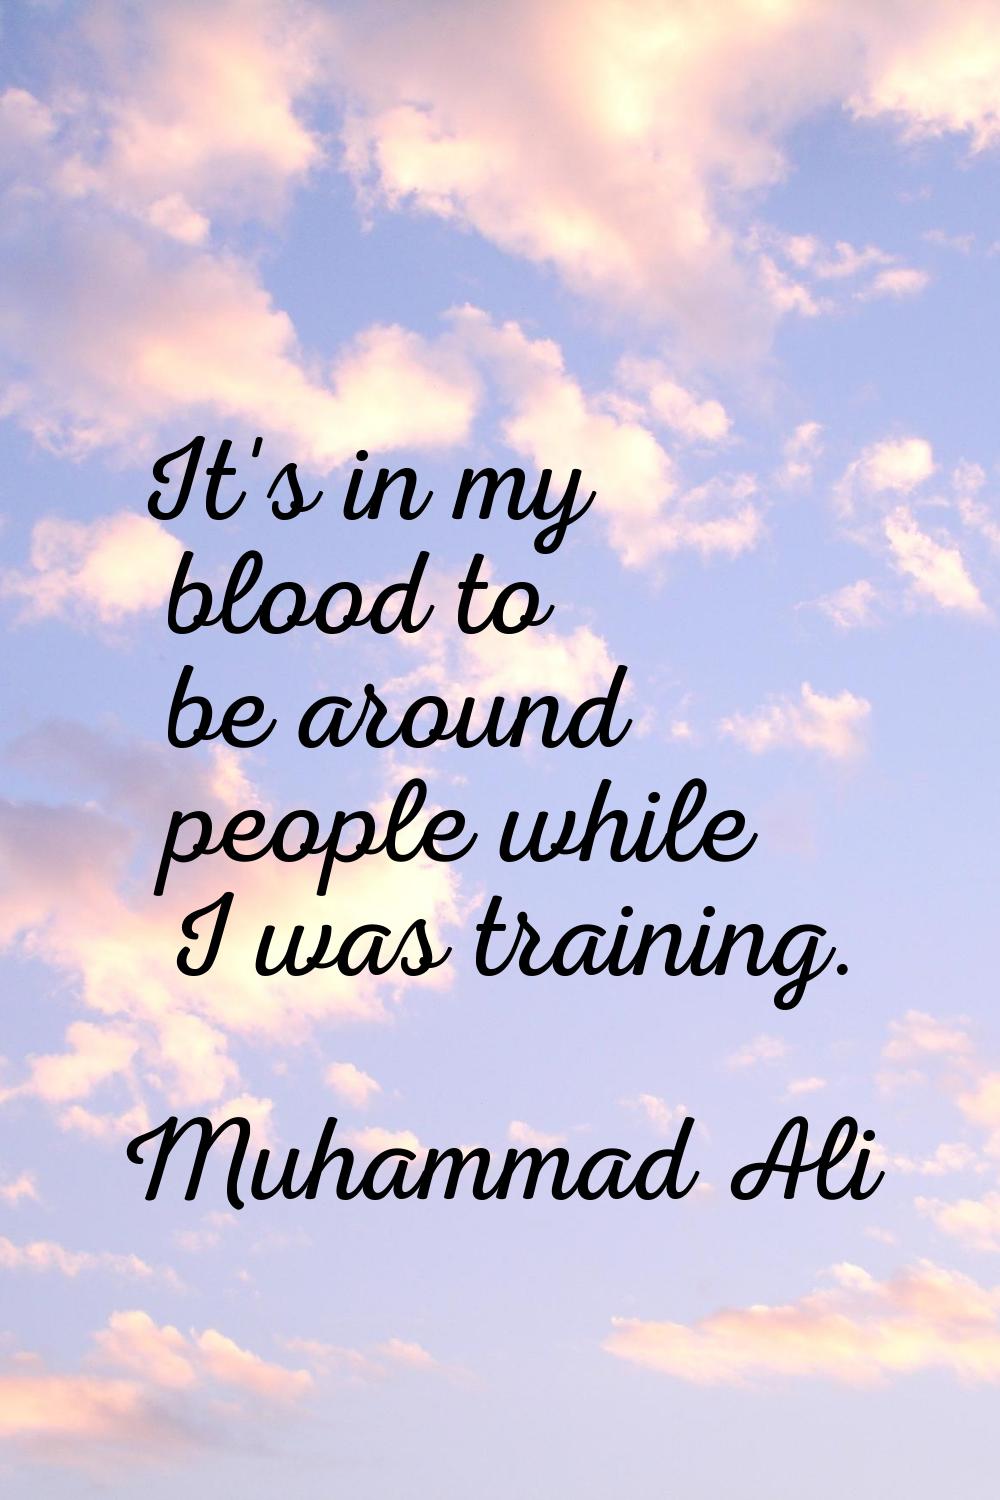 It's in my blood to be around people while I was training.